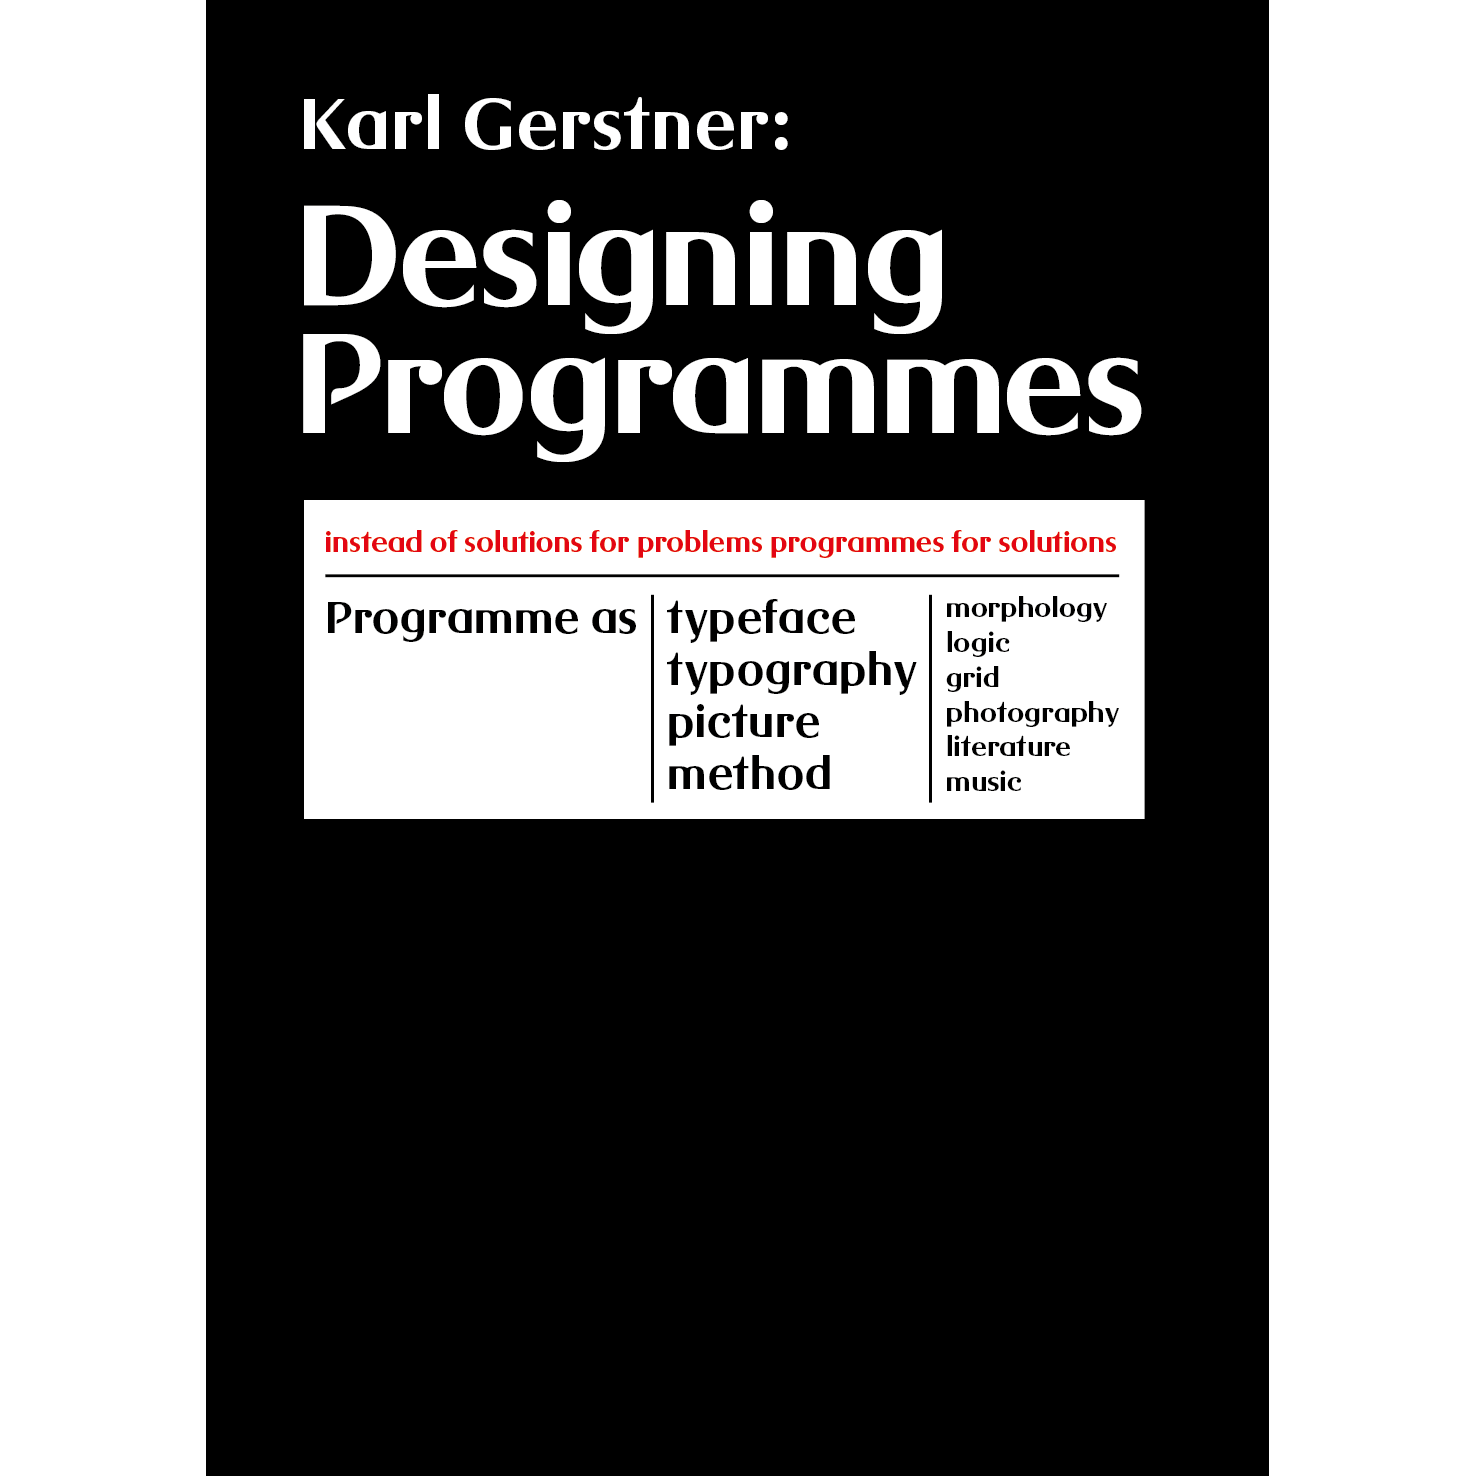 “Designing programmes” PDF for private use